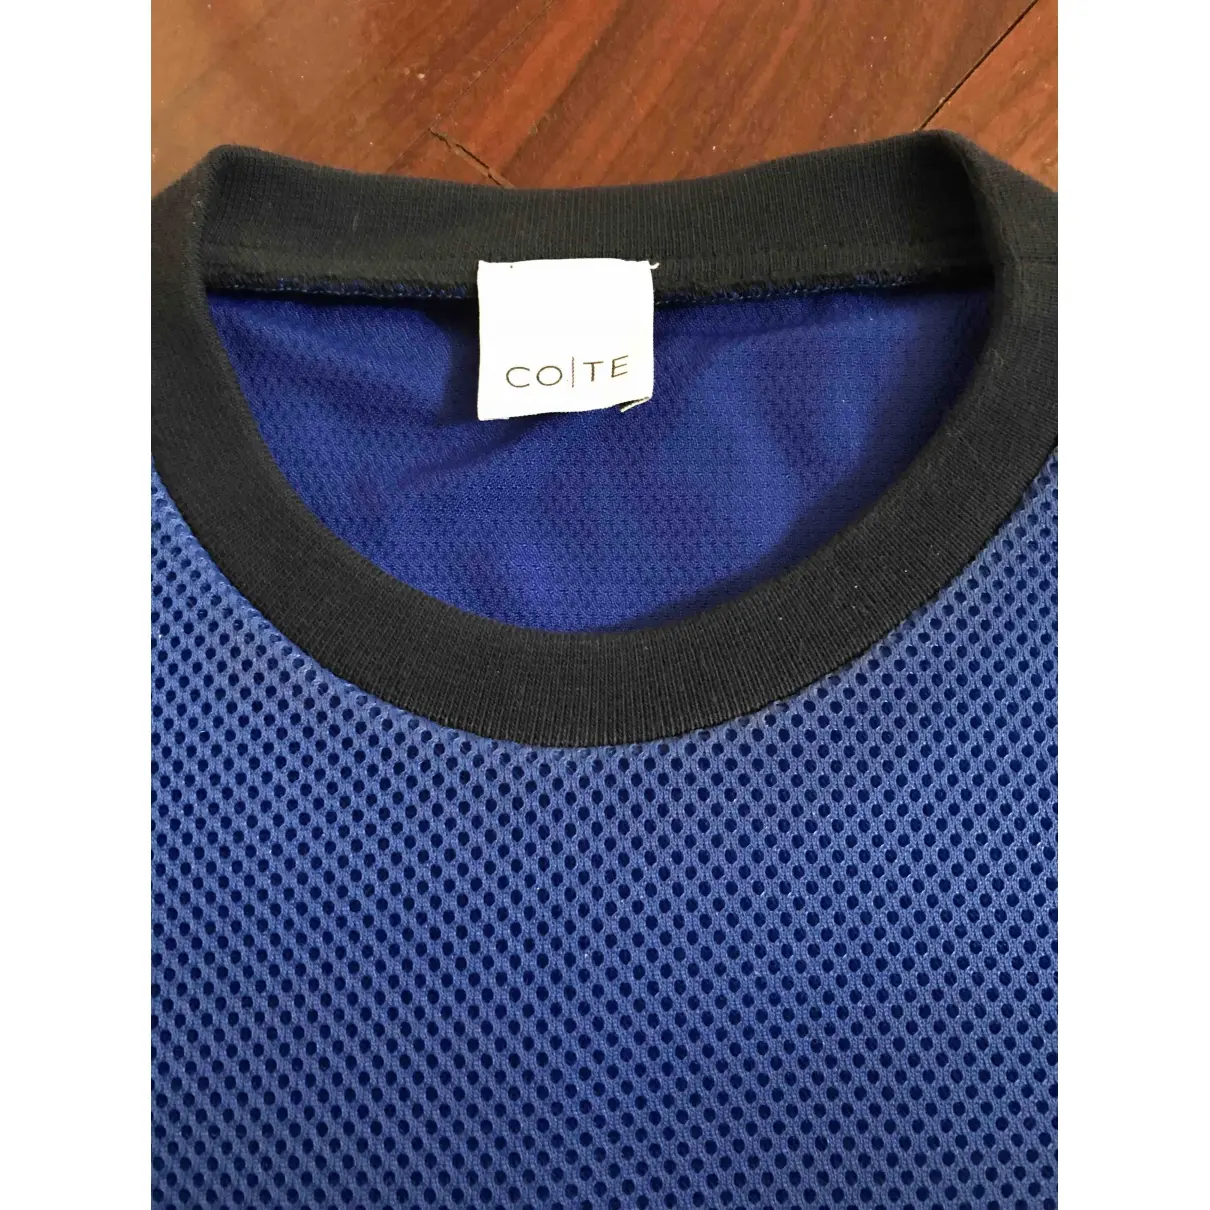 Buy Cote Blue Polyester Top online